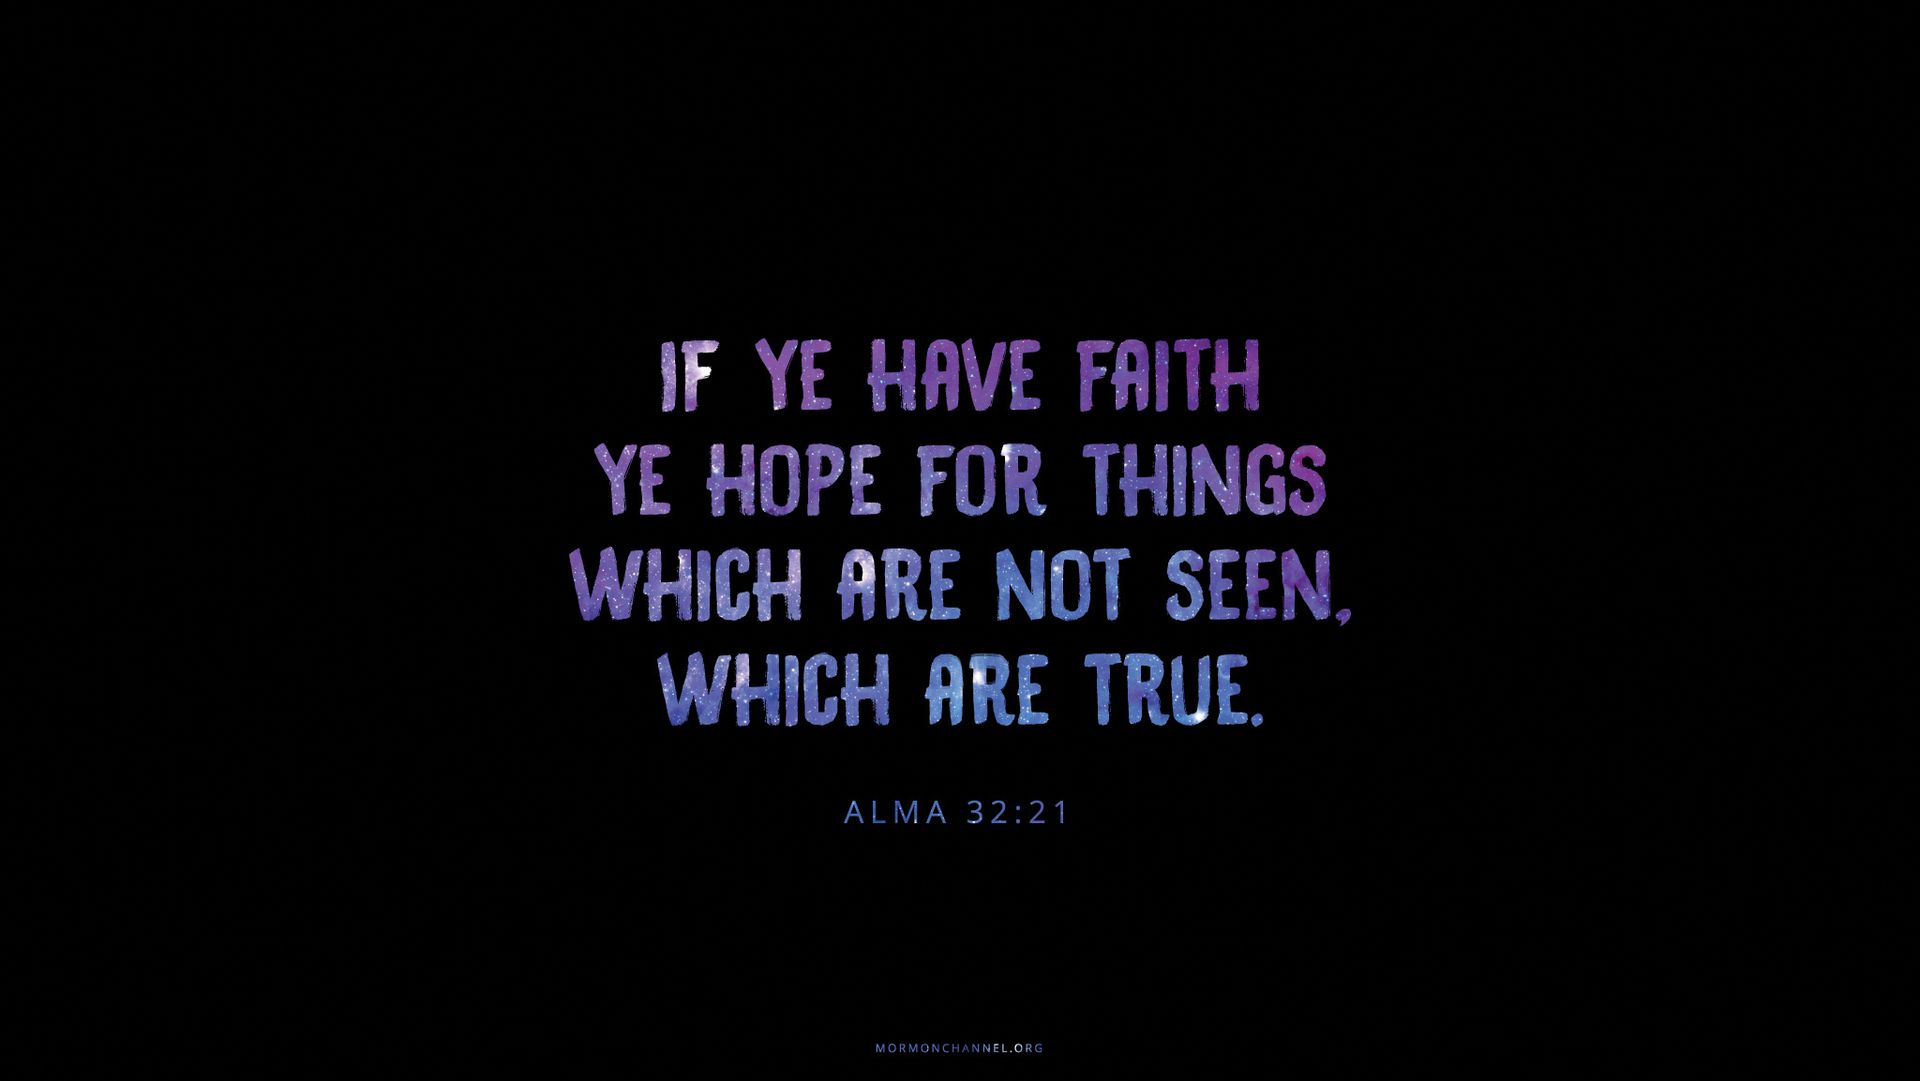 “If ye have faith ye hope for things which are not seen, which are true.”—Alma 32:21